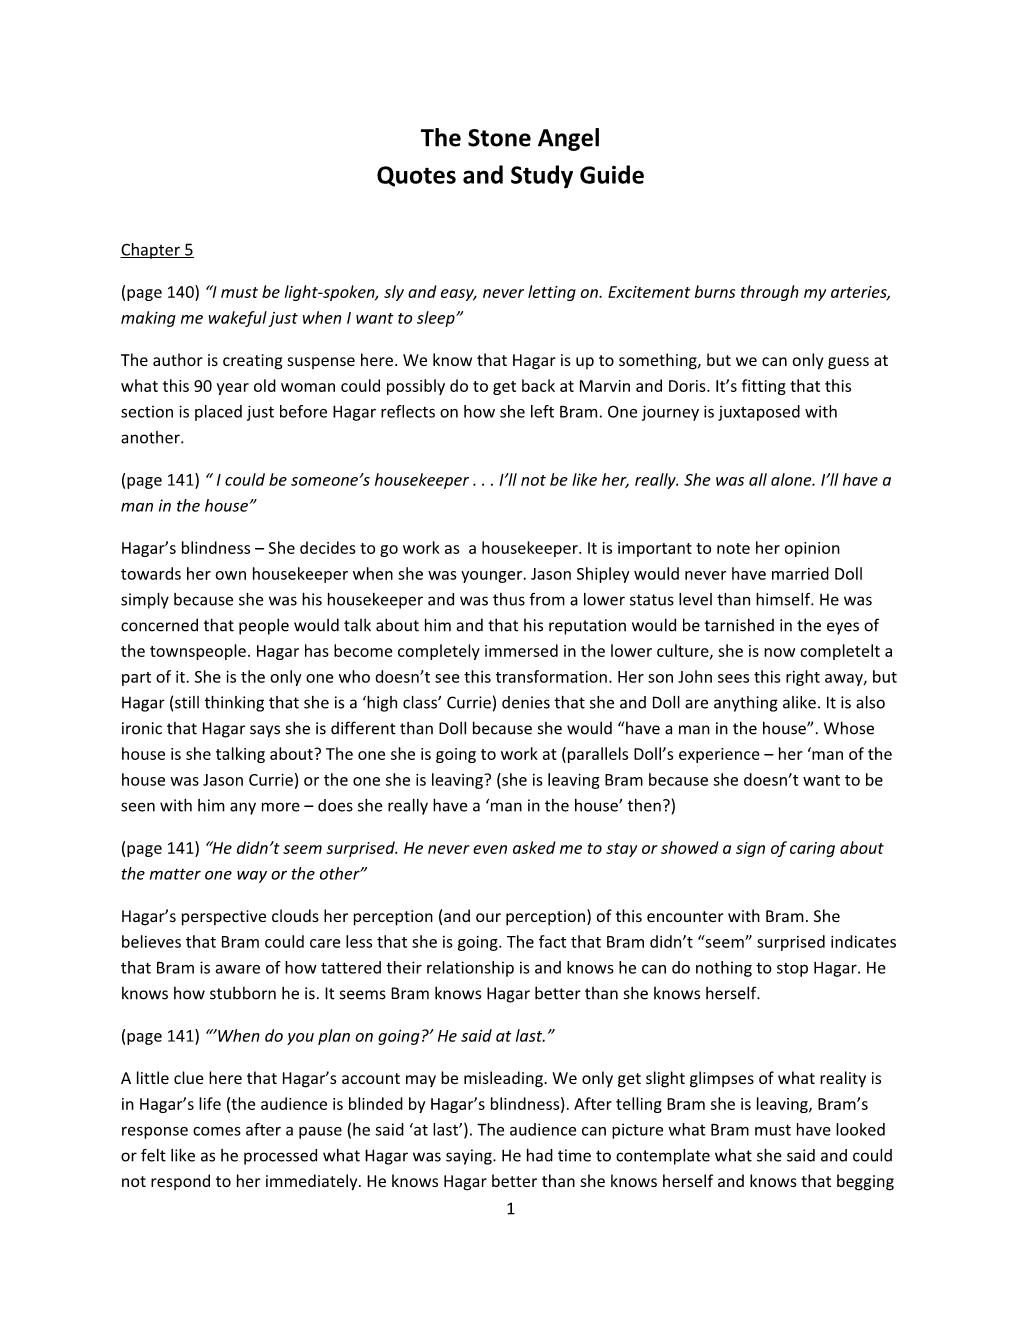 Quotes and Study Guide s1